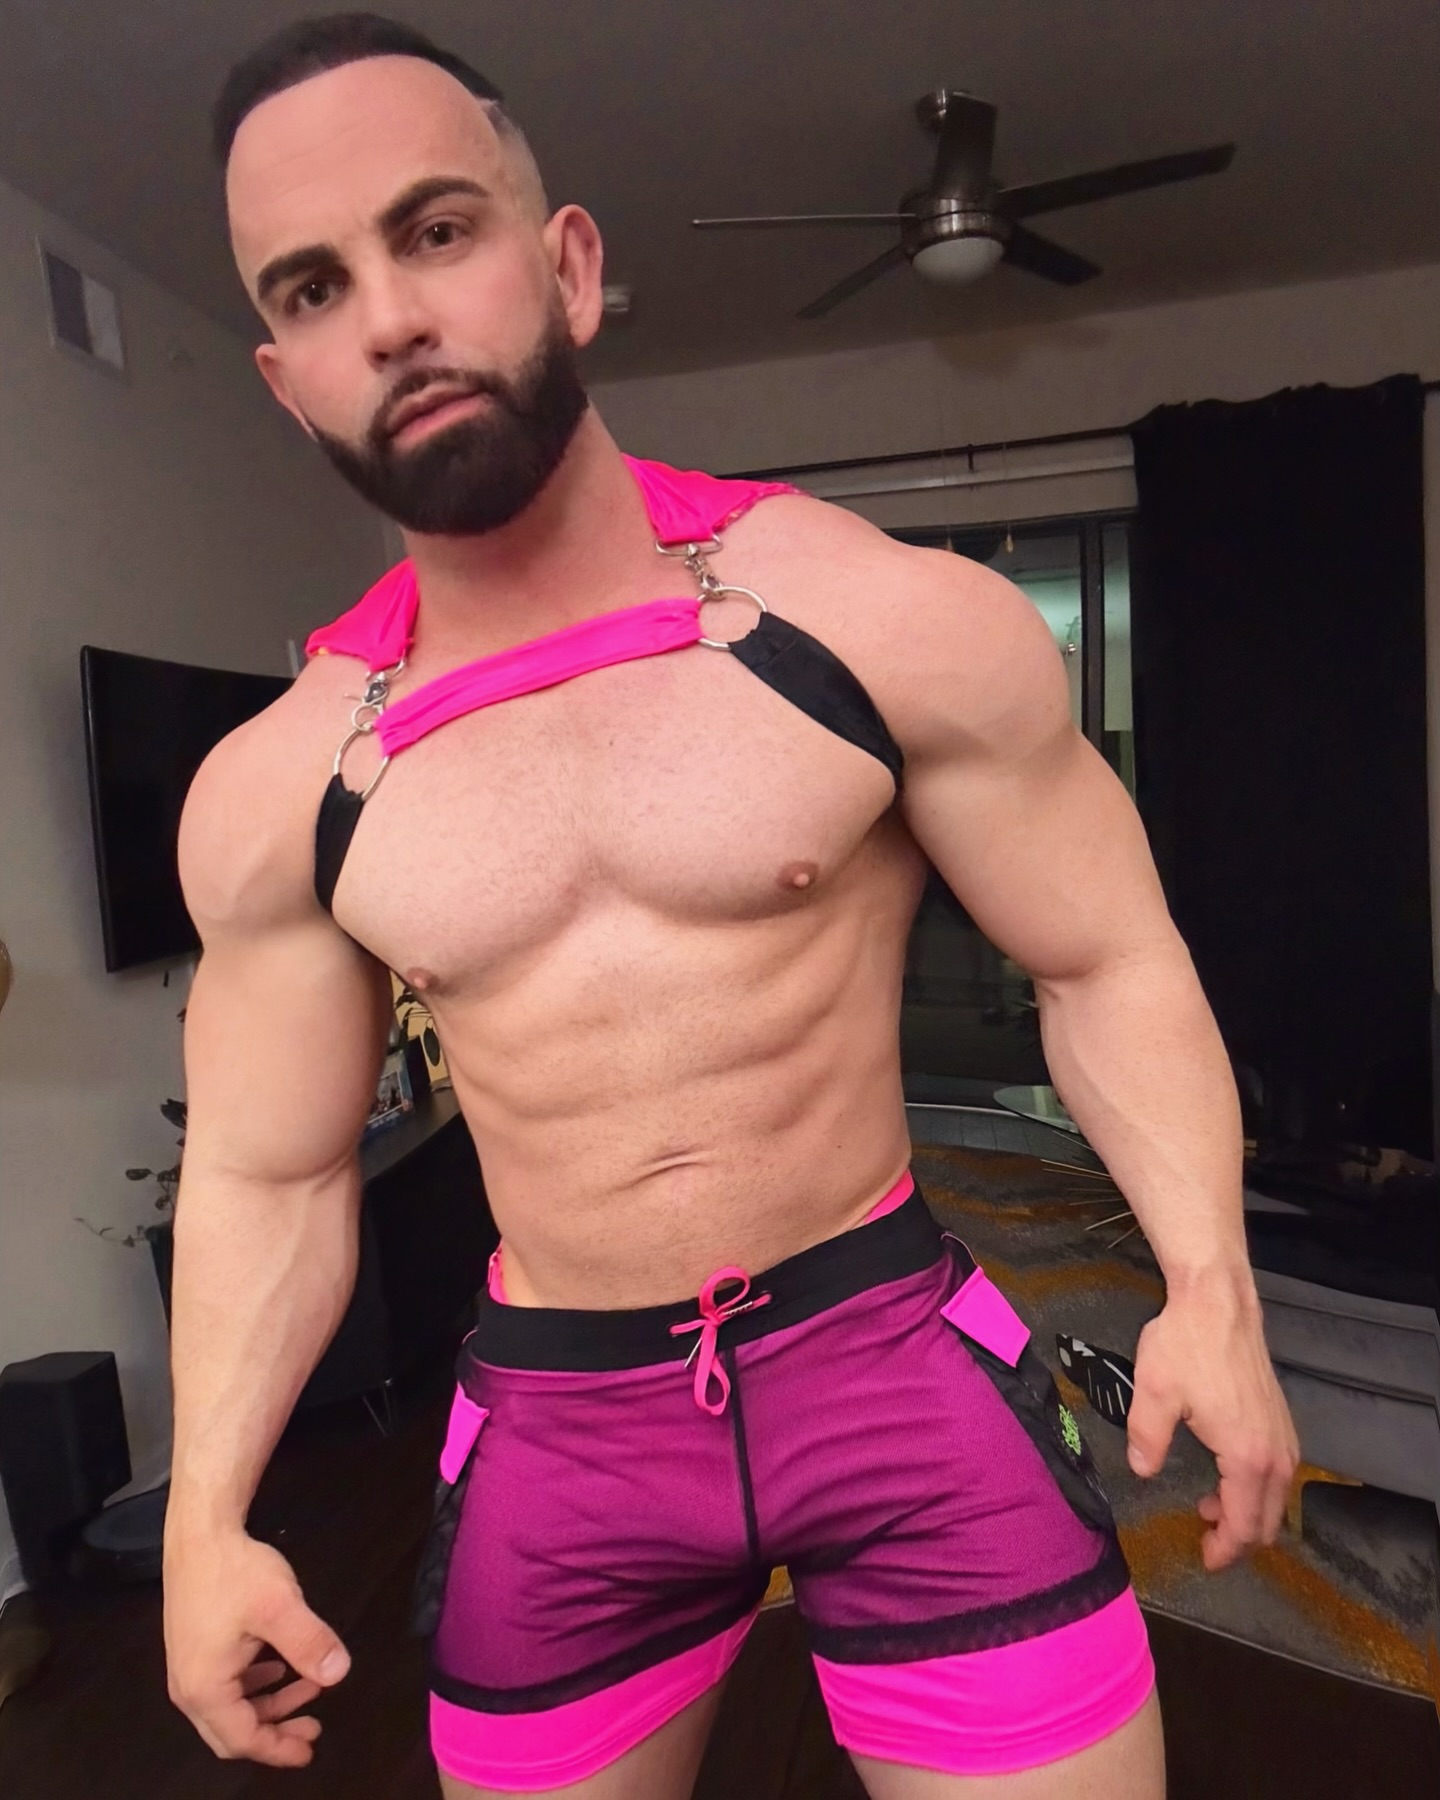 Real men can’t wear pink? 😜 What do you think?